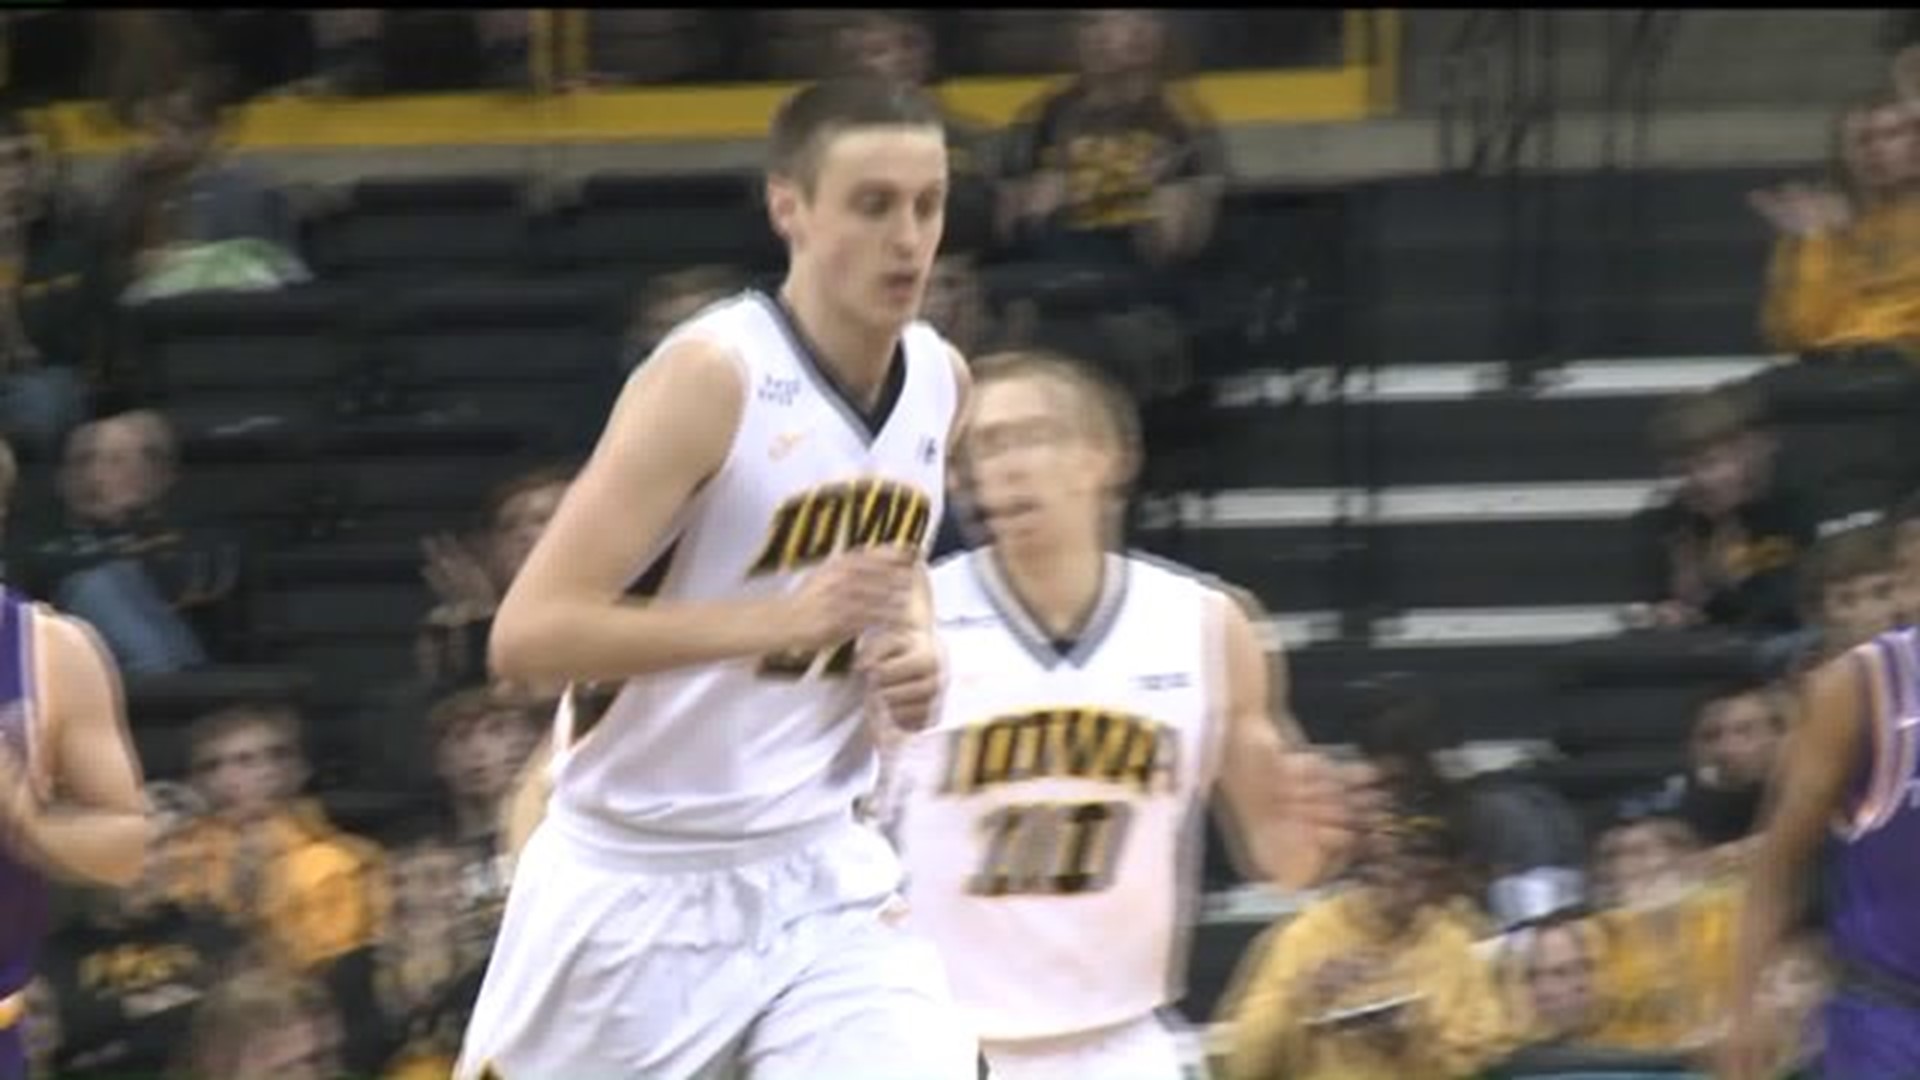 Baer leads Iowa to another non conference win